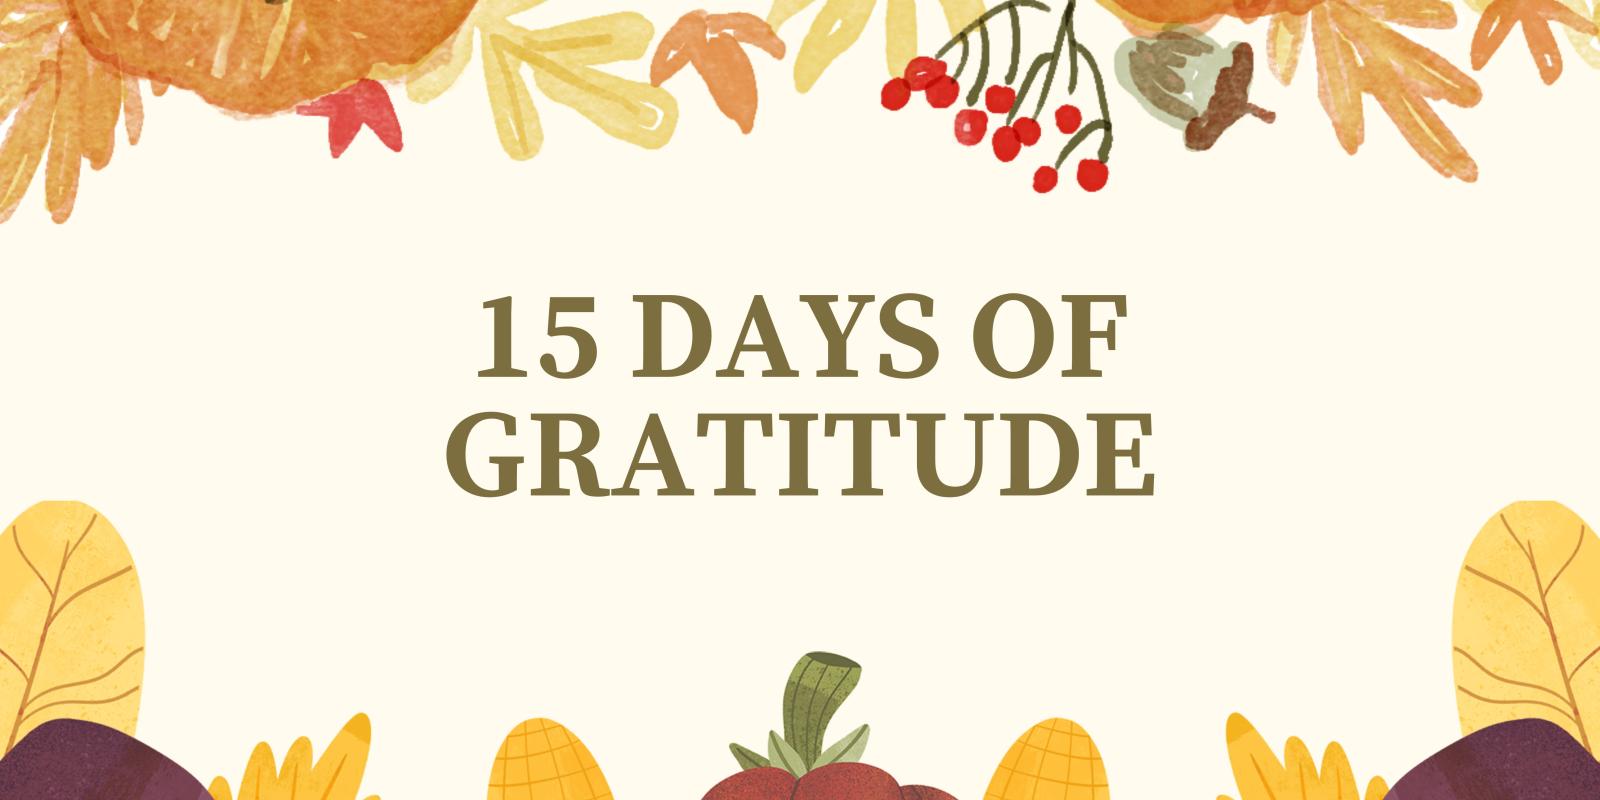 15 Days of Gratitude surrounded by leaves and berries